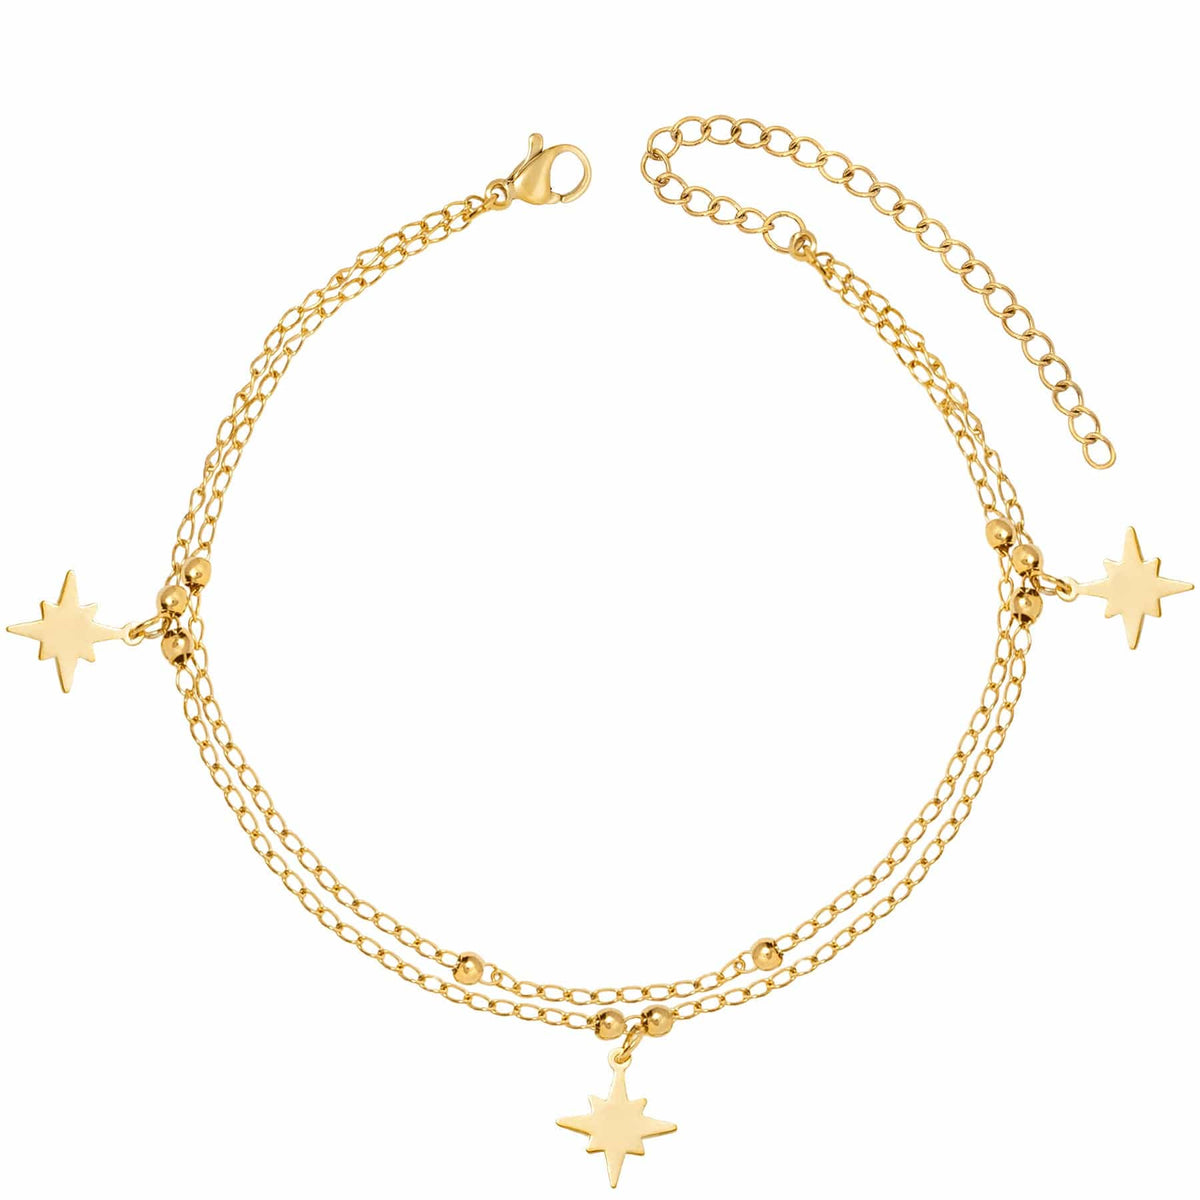 BohoMoon Stainless Steel Twilight Anklet Gold